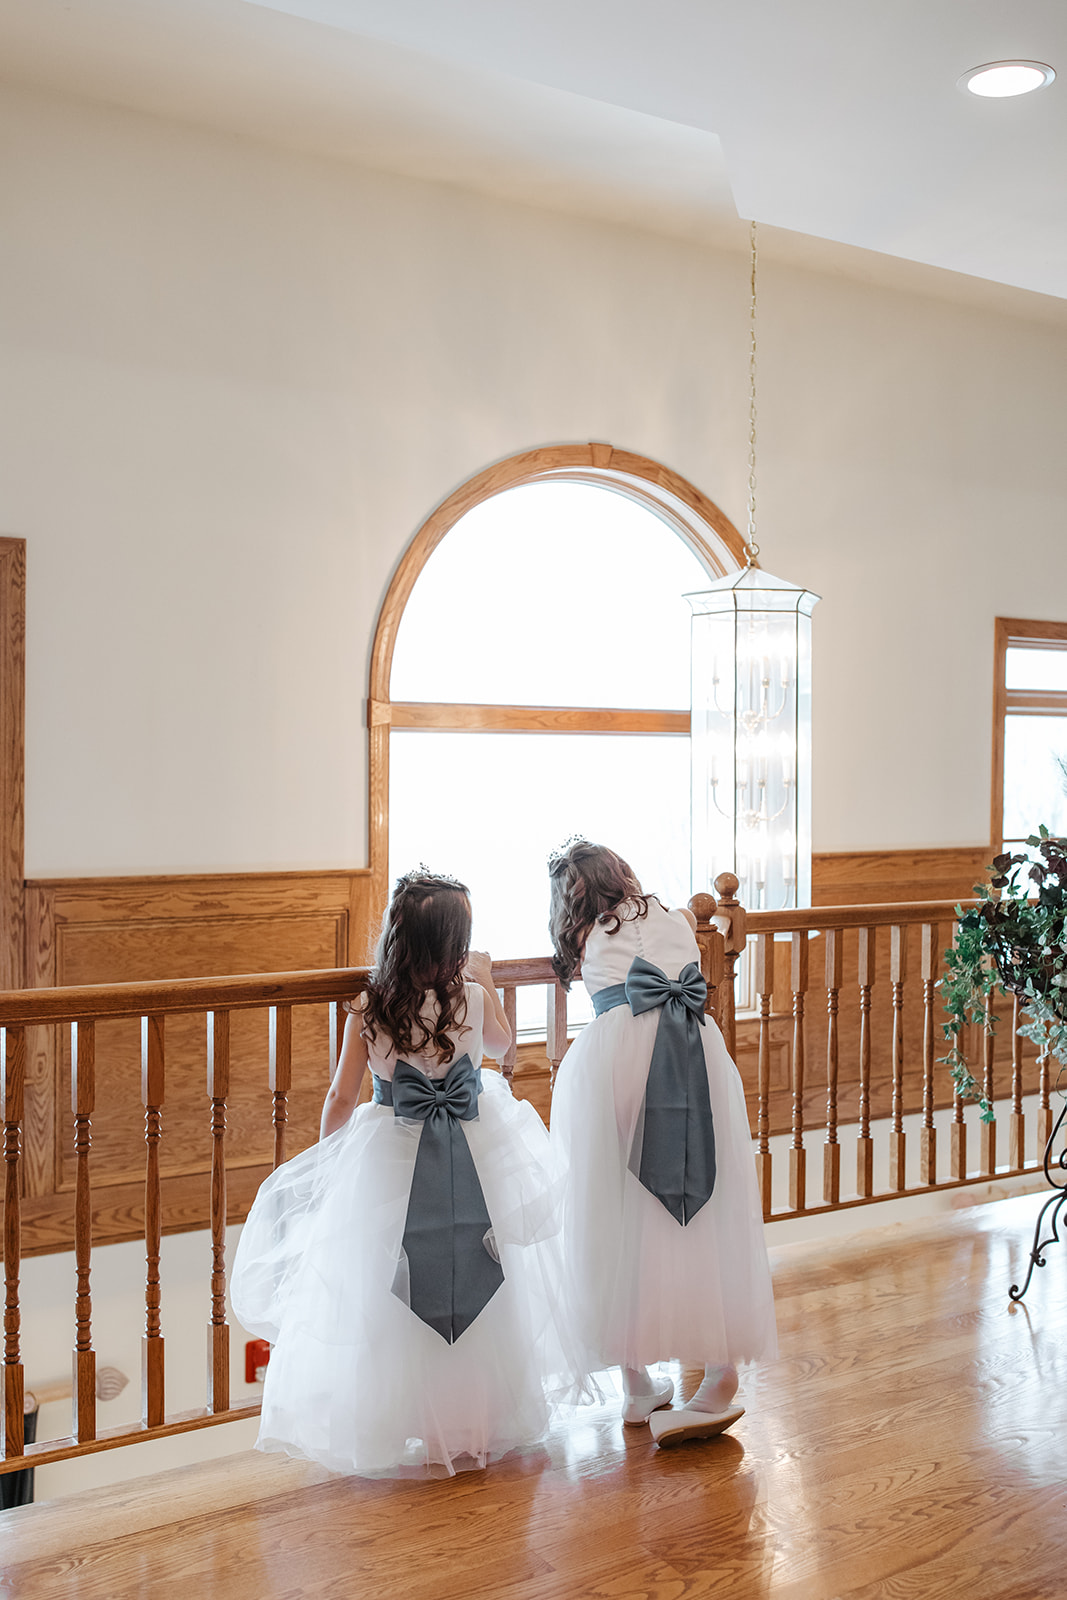 the flowergirls looking over the railing